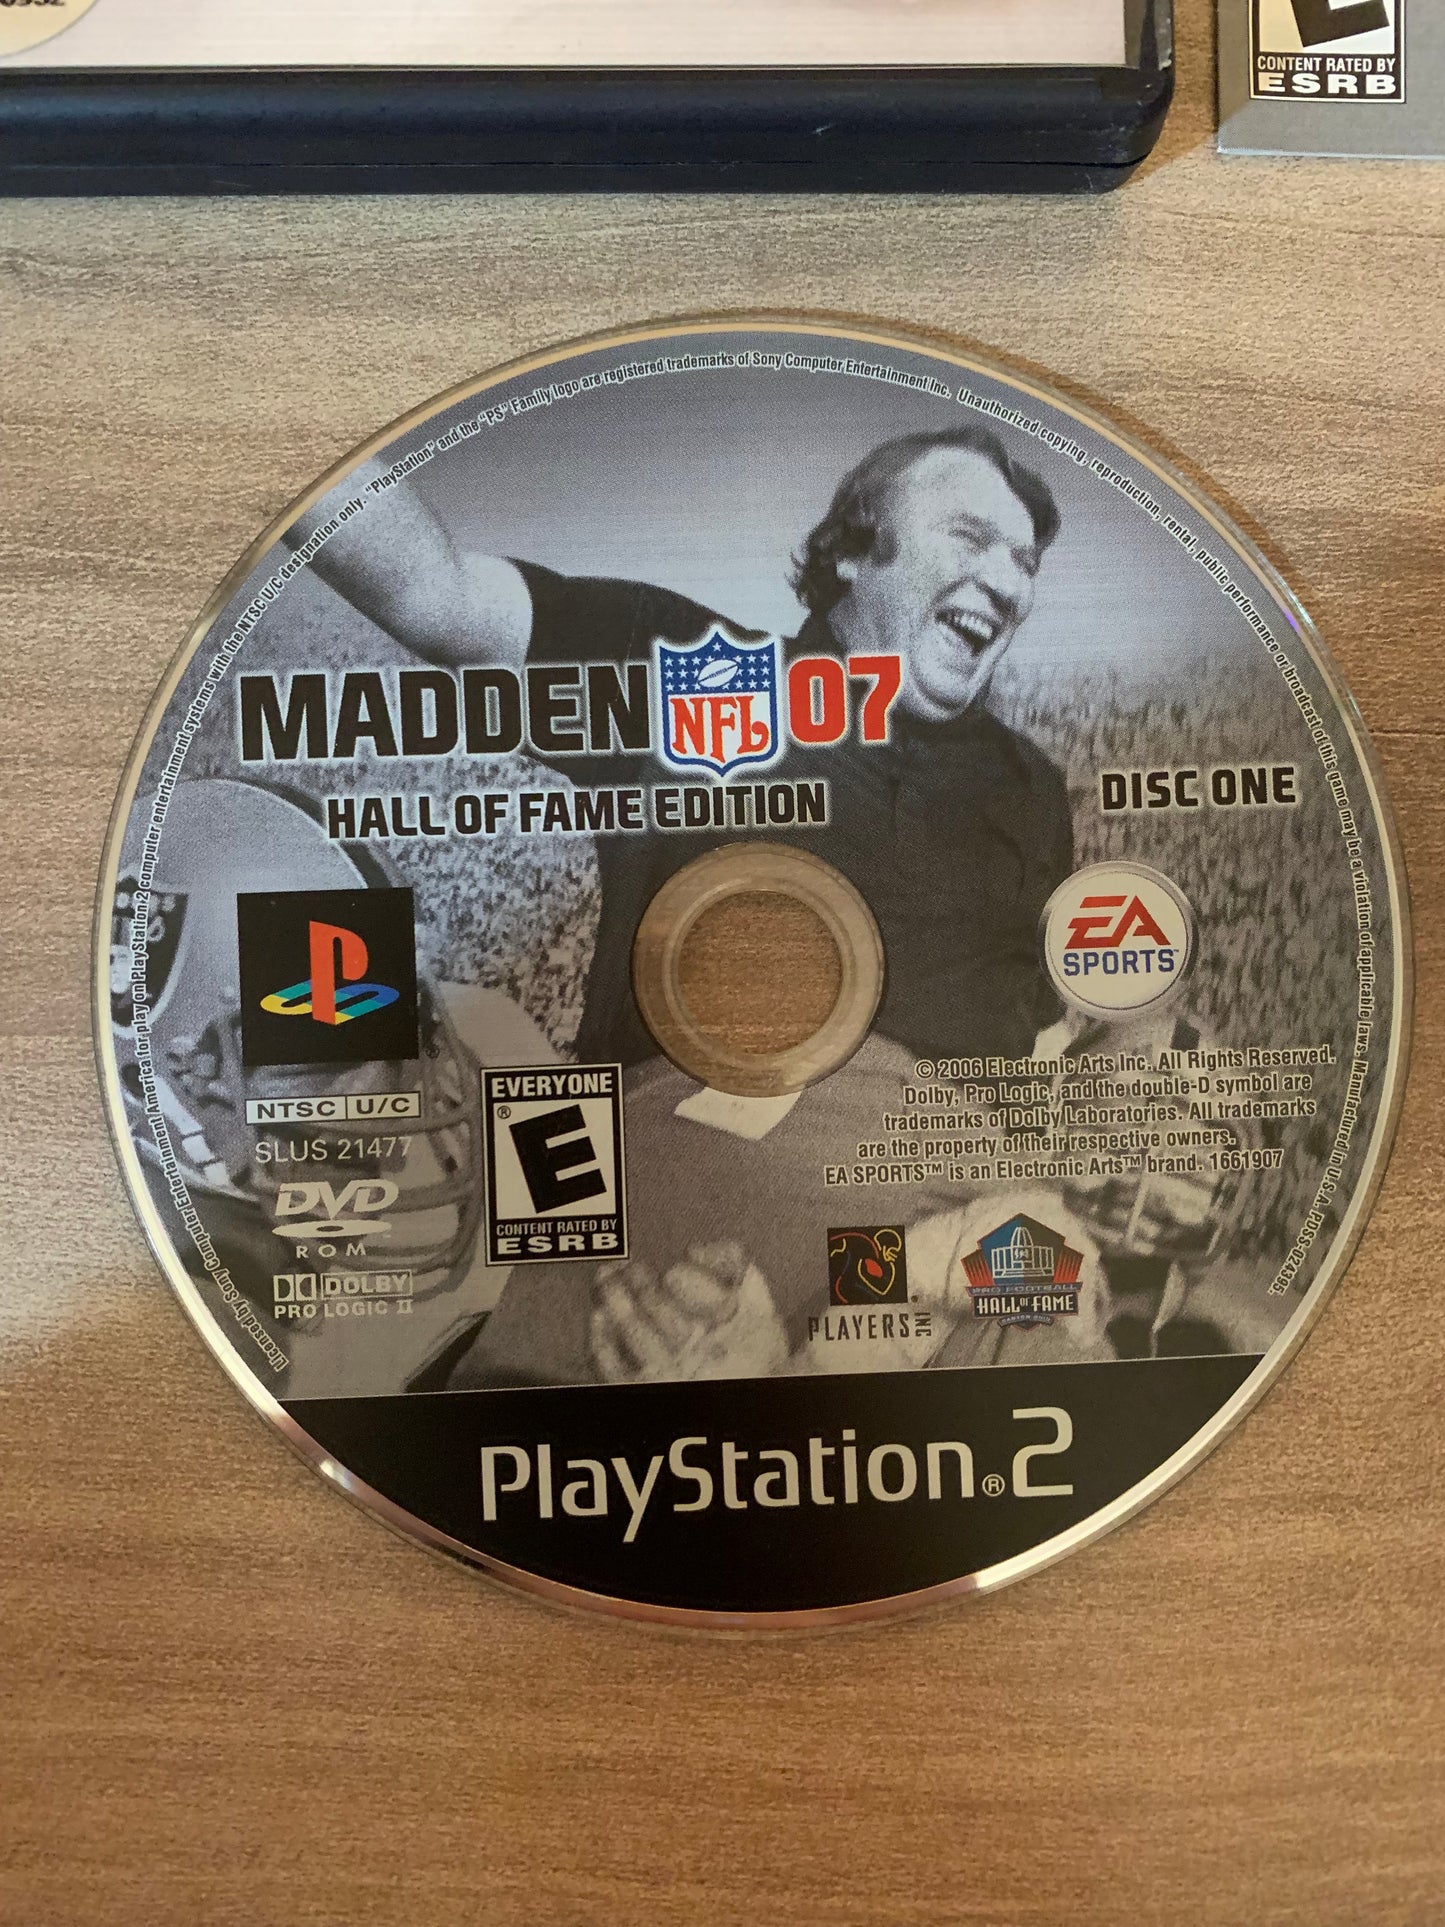 SONY PLAYSTATiON 2 [PS2] | MADDEN NFL 07 | HALL OF FAME EDiTiON